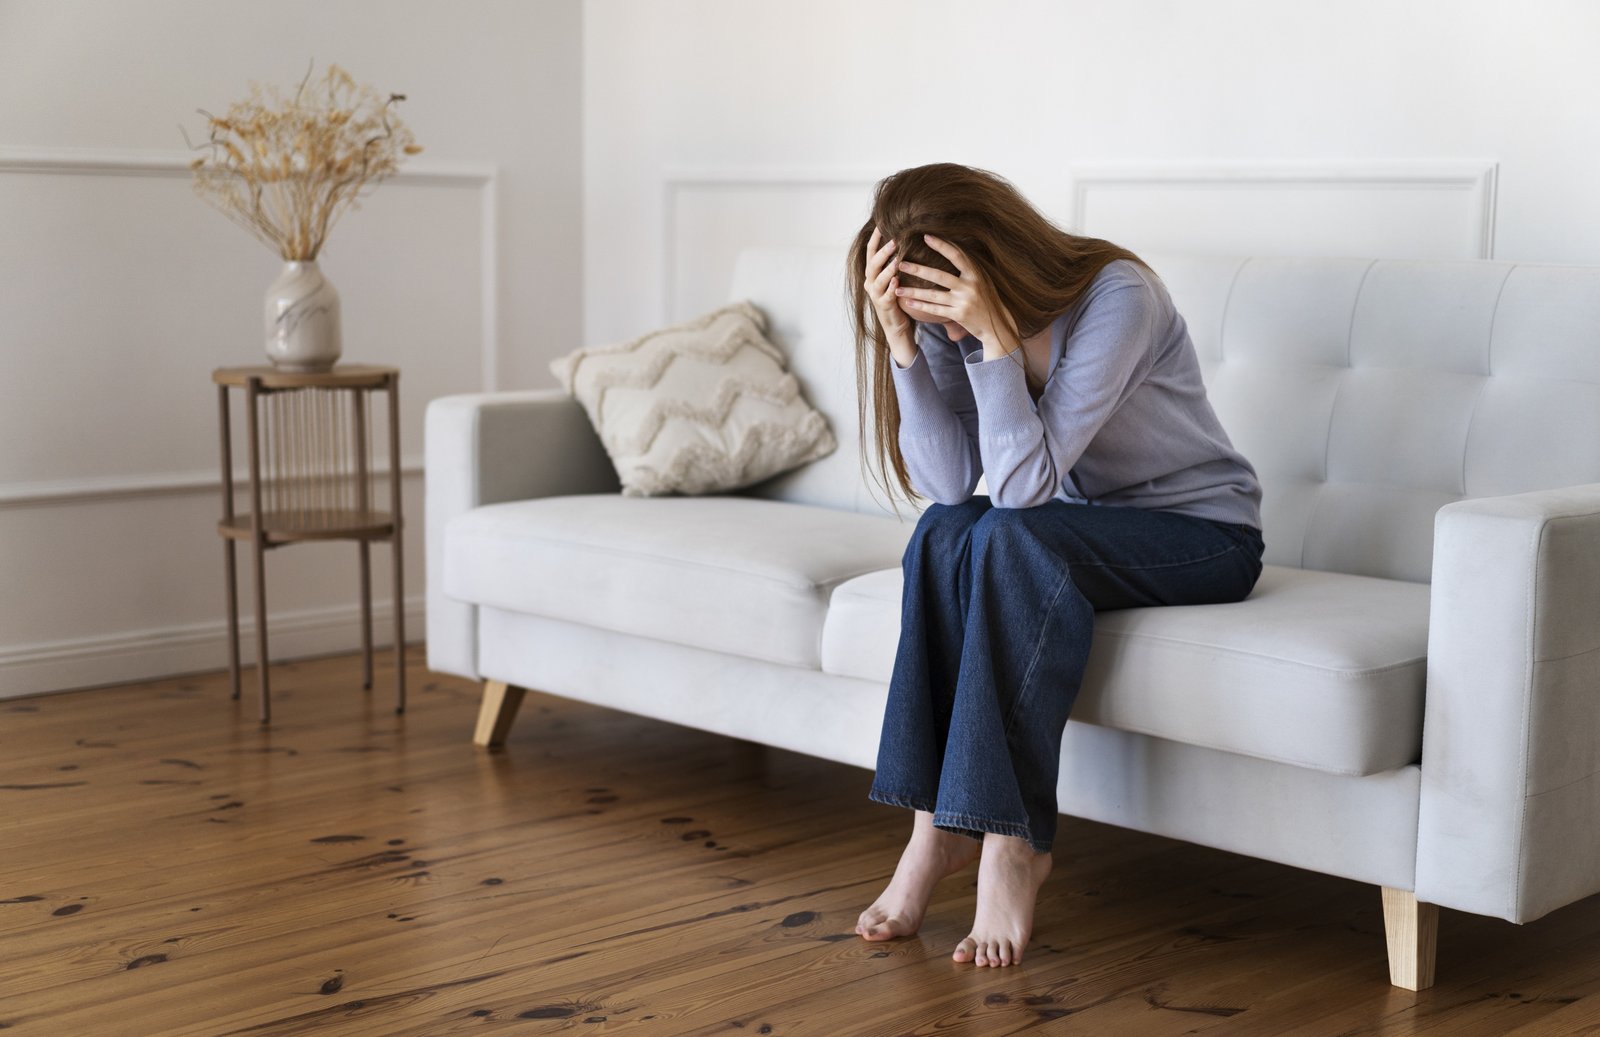 Women With Premenstrual Disorders At Double Risk Of Suicide: Study